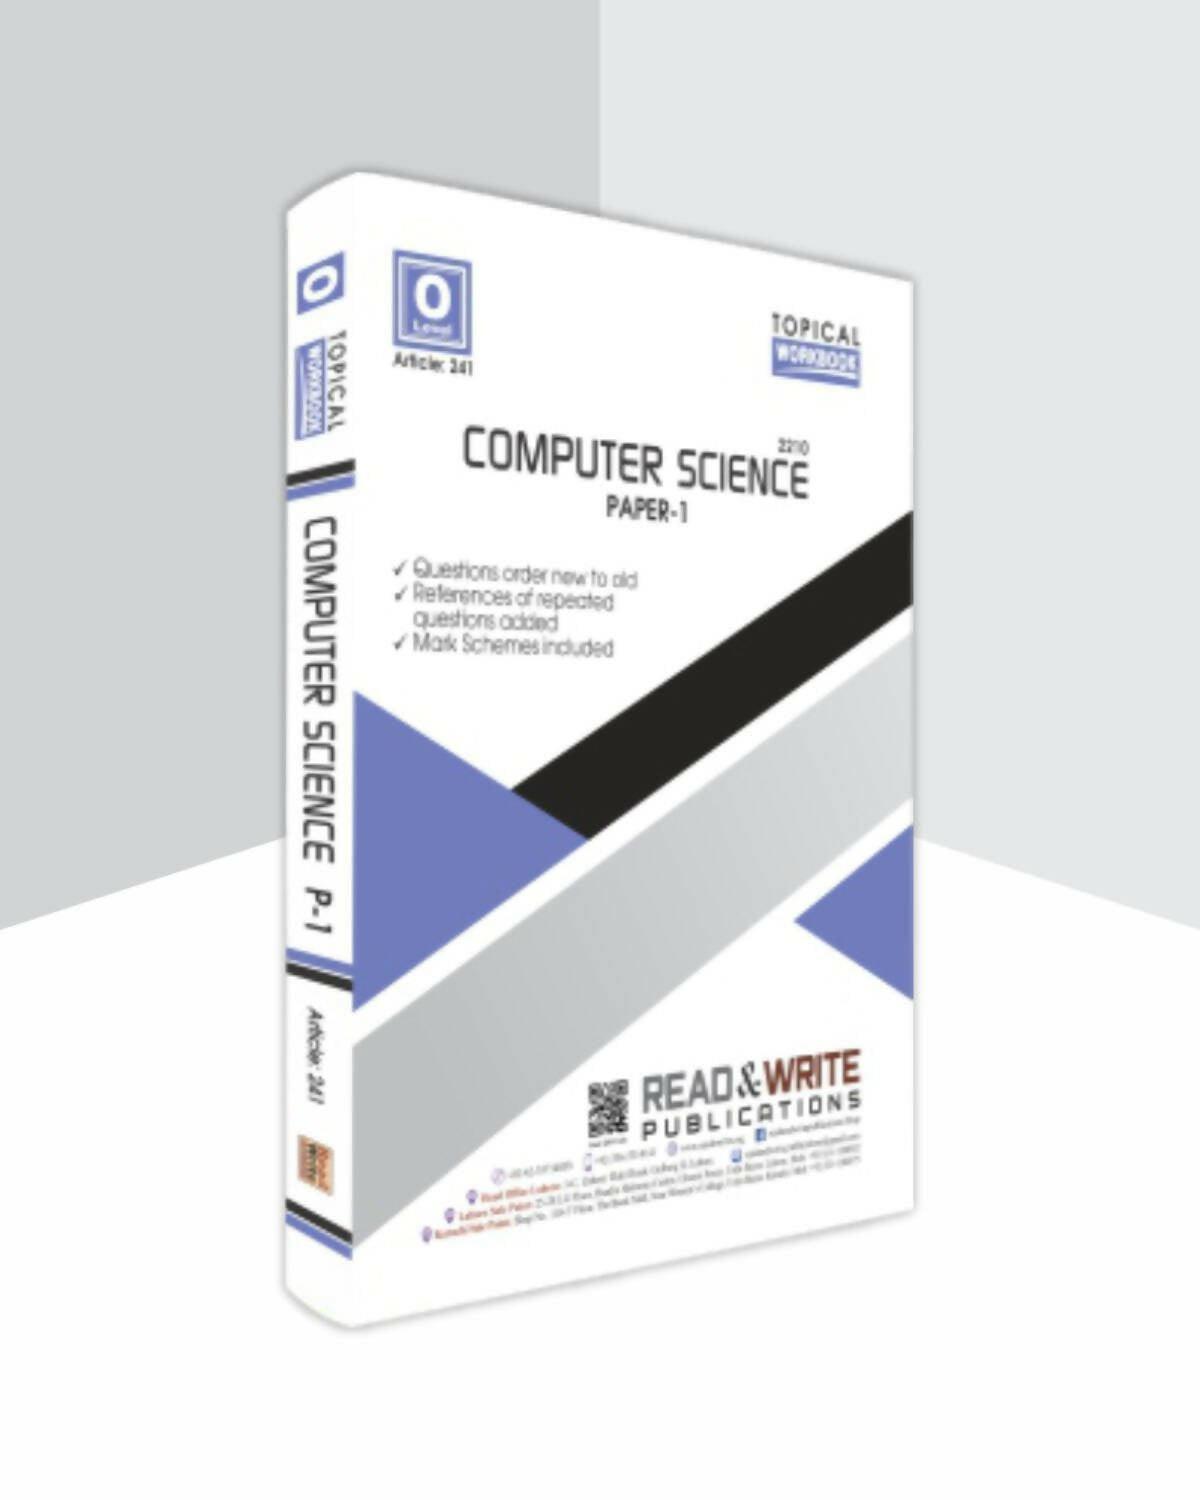 241 Computer Science O Level Paper-1 Work Book Series. - ValueBox